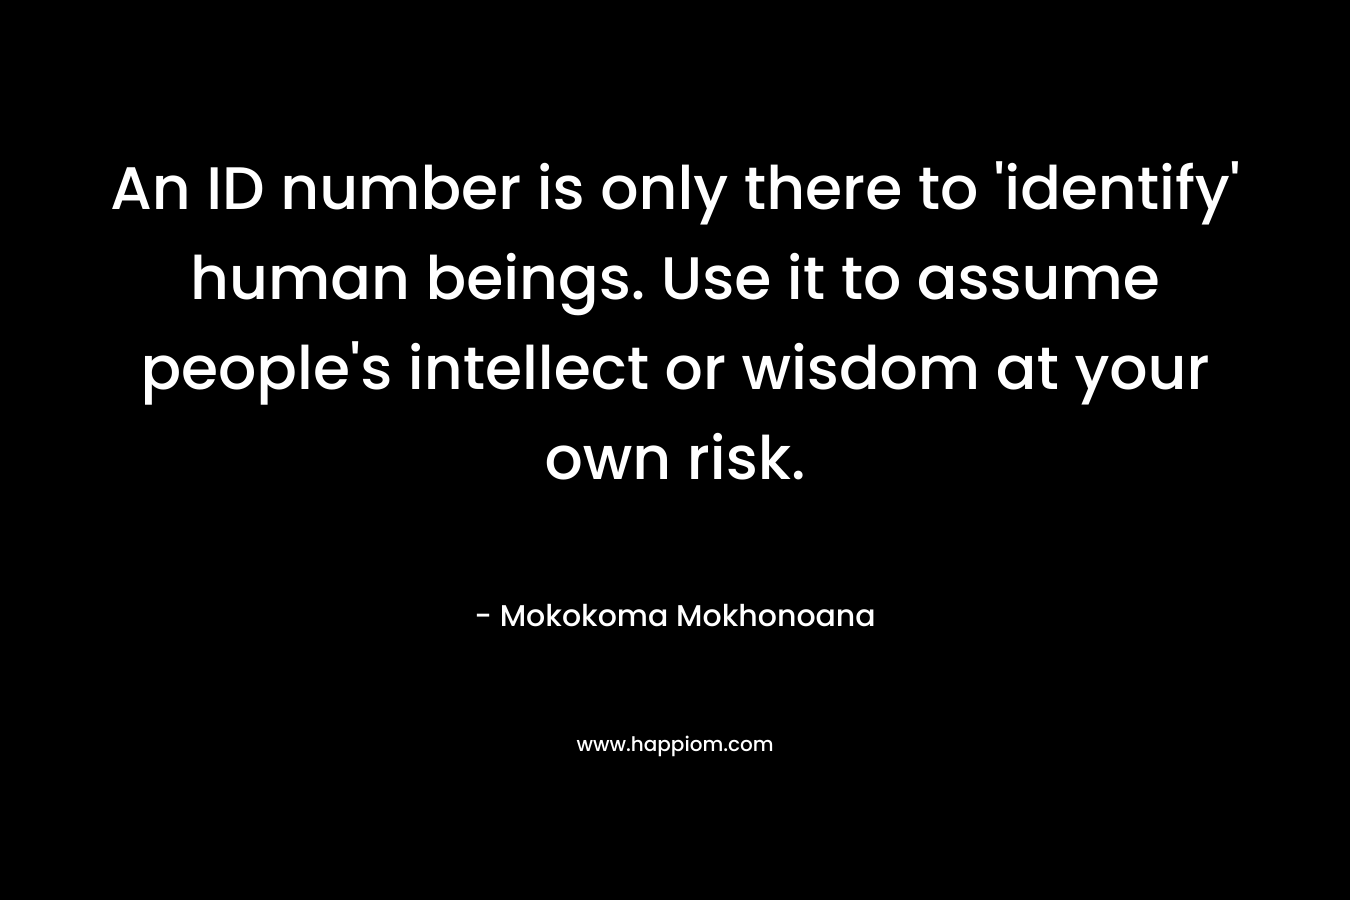 An ID number is only there to ‘identify’ human beings. Use it to assume people’s intellect or wisdom at your own risk. – Mokokoma Mokhonoana